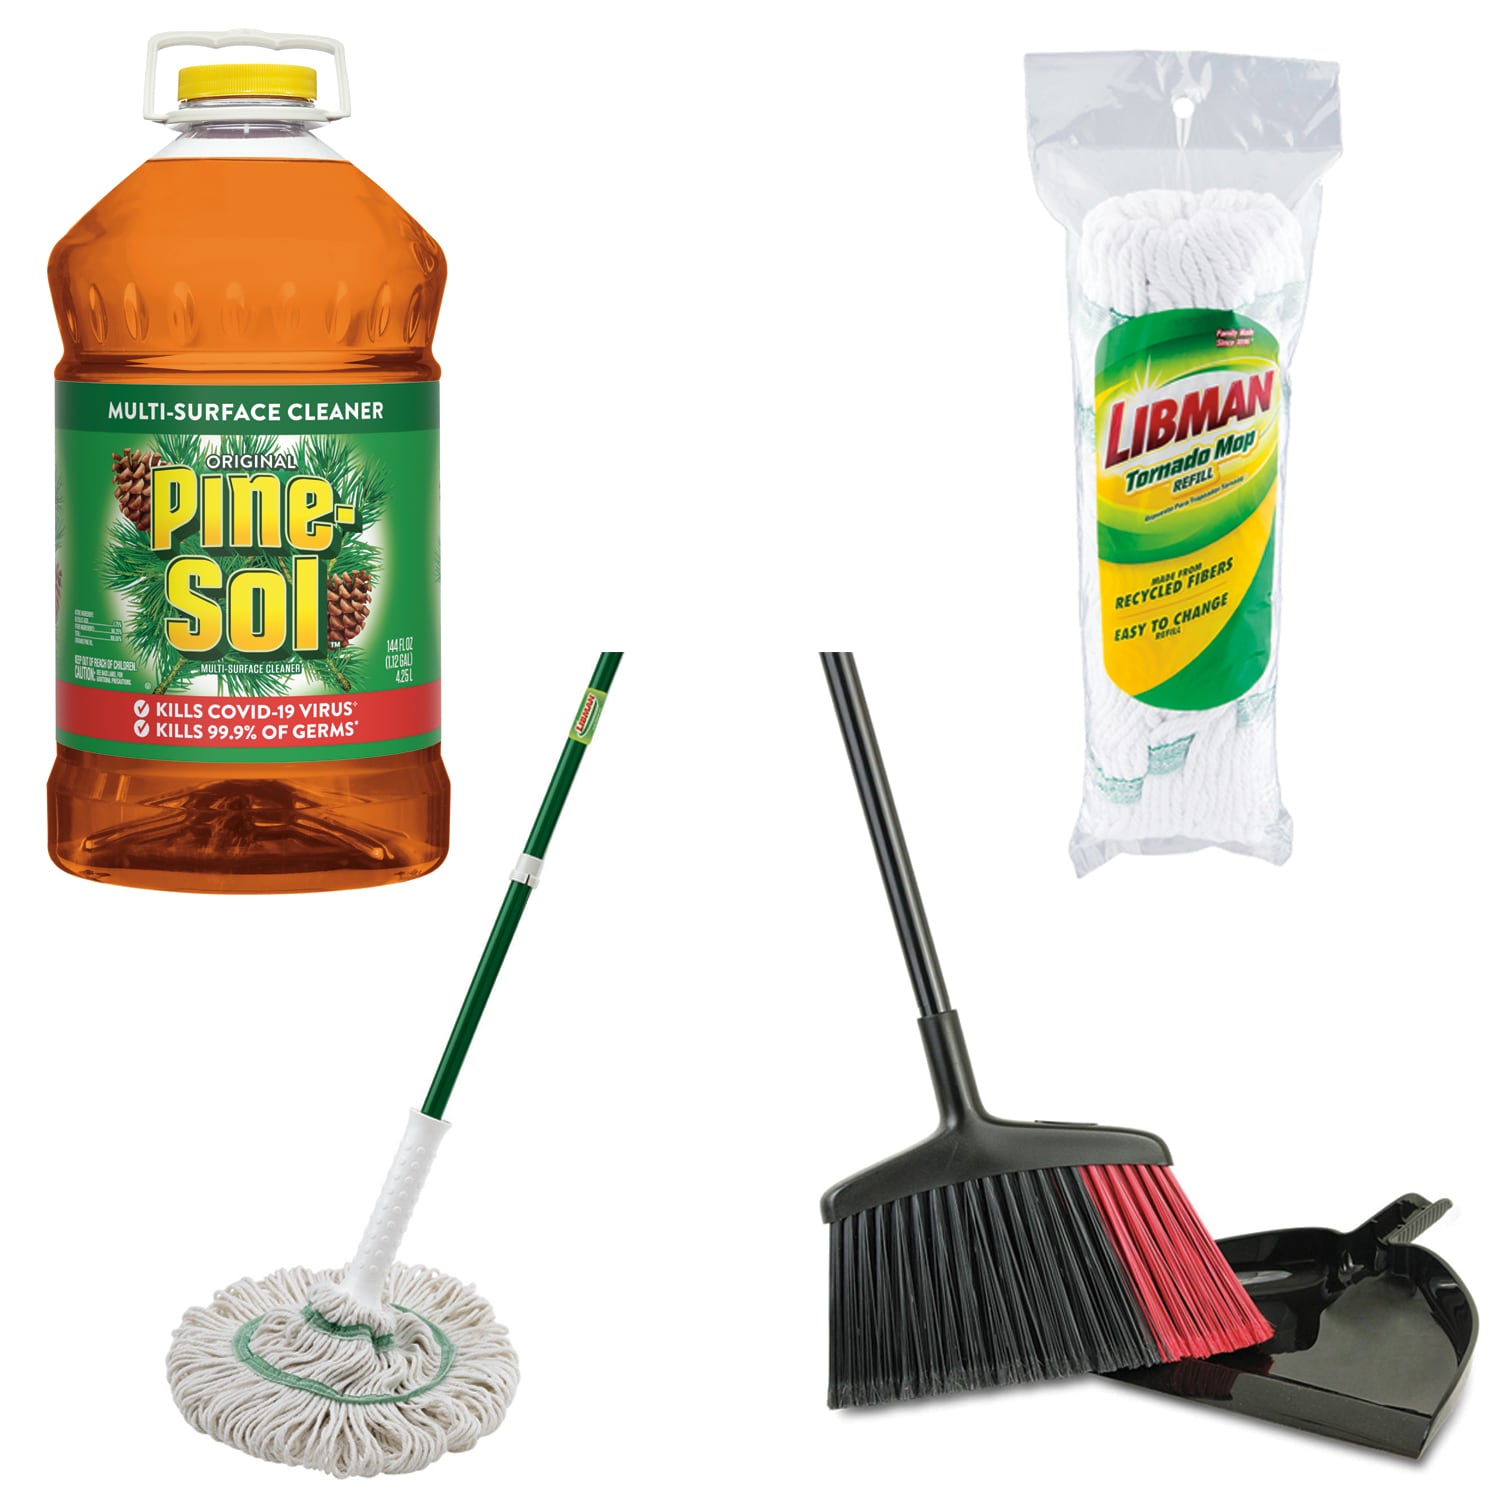 Shop Libman Floor Cleaner Colletion with Pine Sol All-Purpose Cleaner at